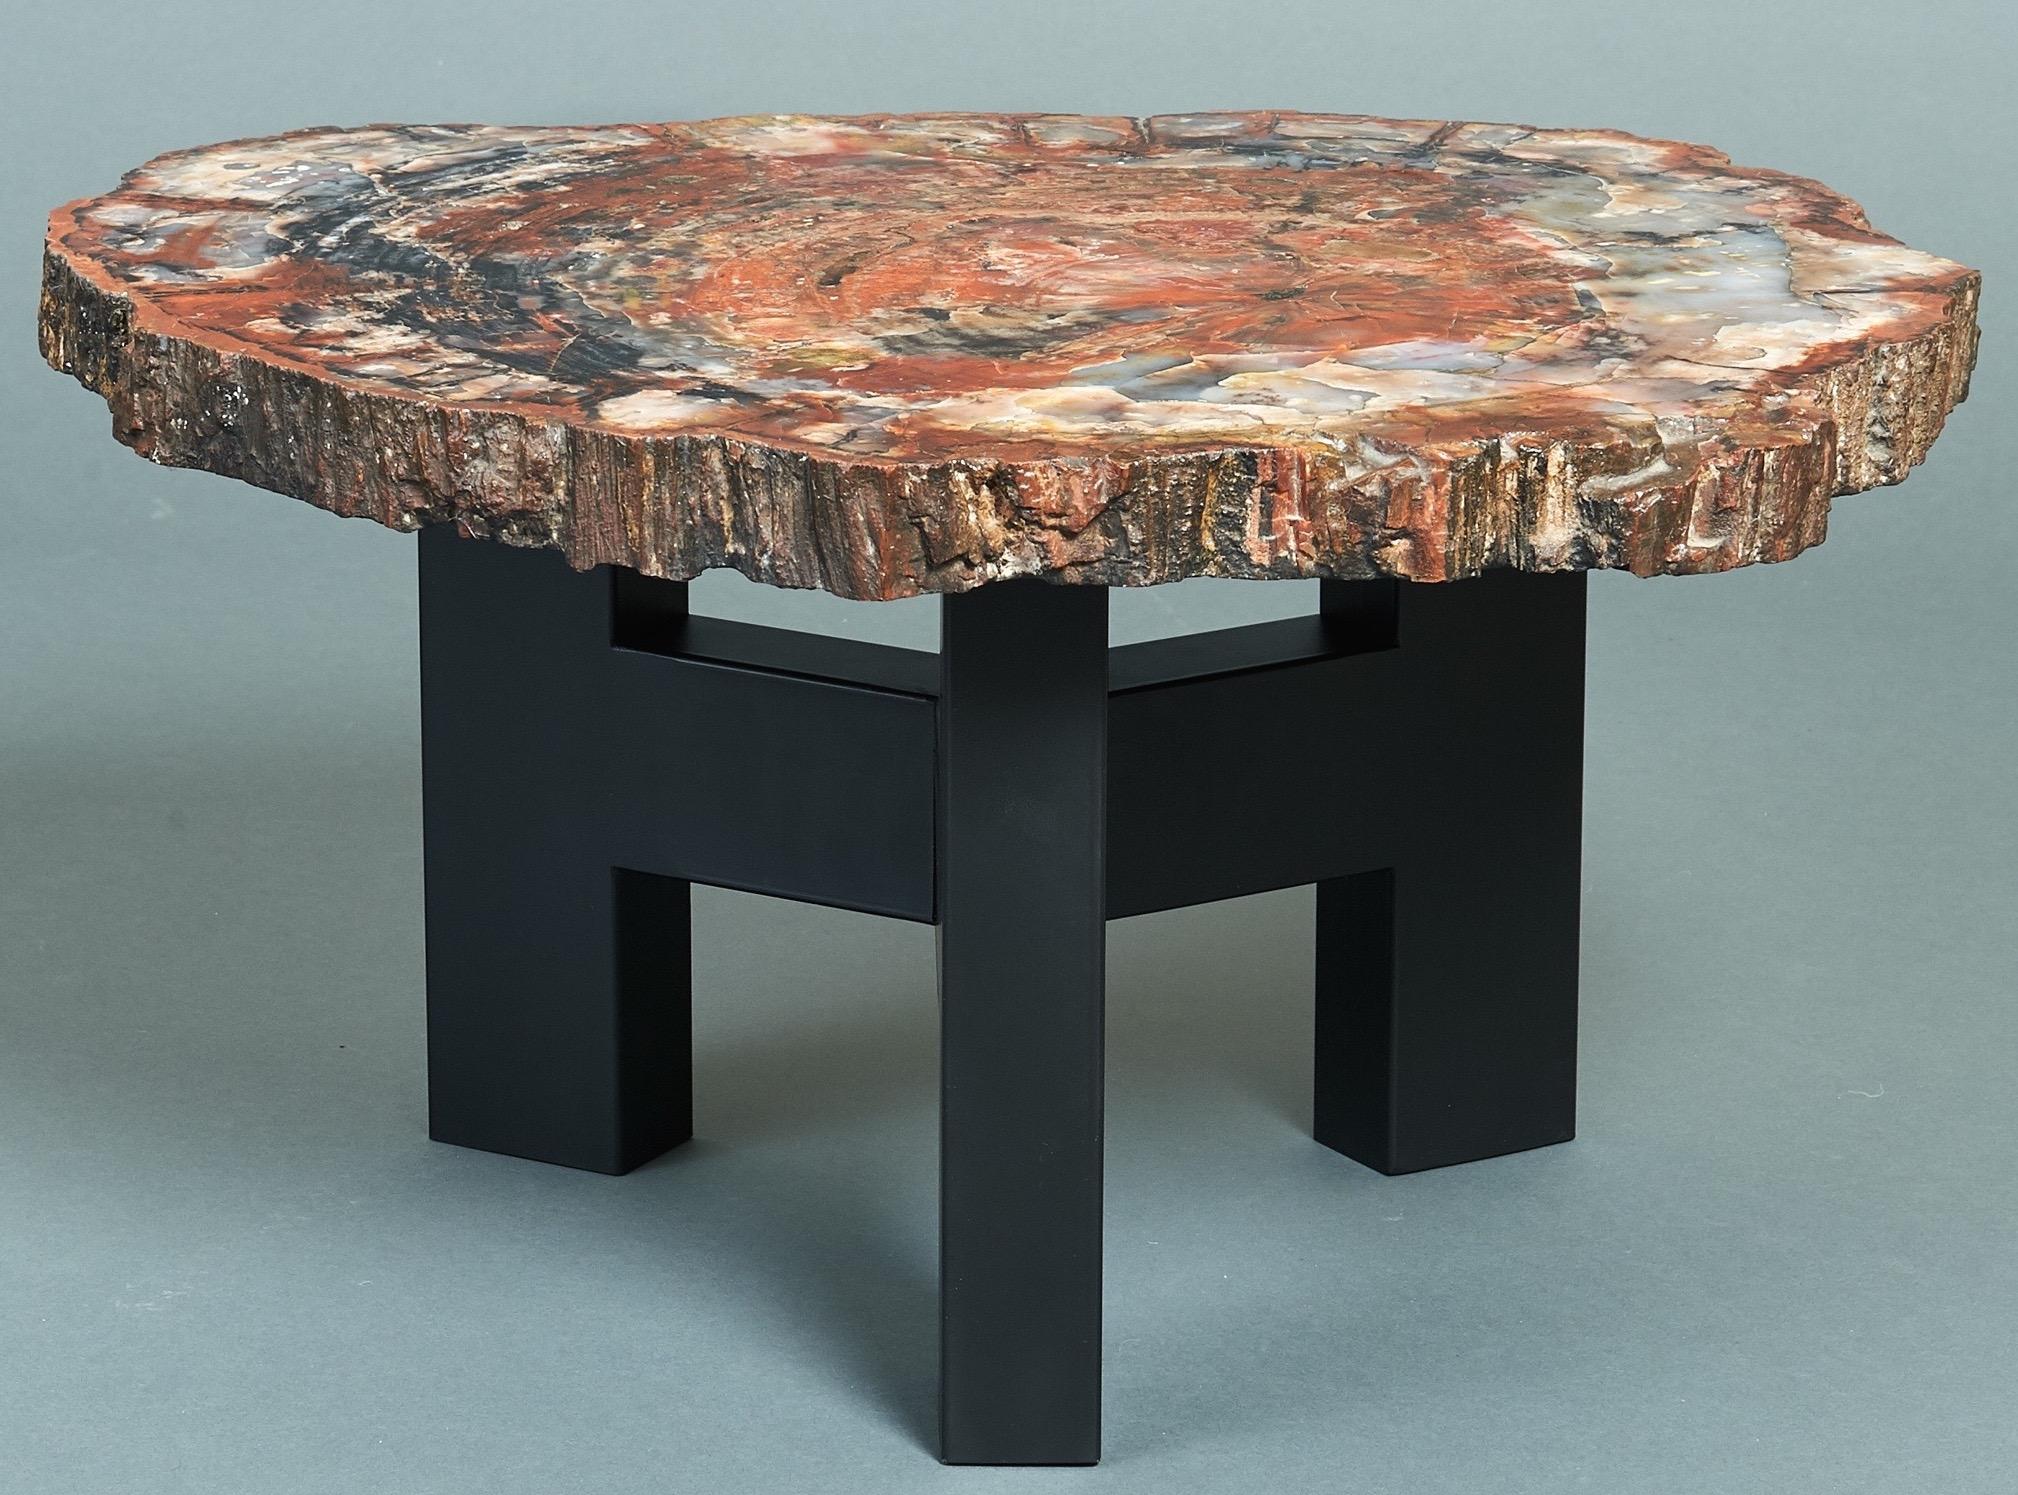 Ado Chale (b. 1928)

An early and exceptional organic coffee table by Ado Chale. Chale’s iconic tripod base, in enameled steel, supports a gleaming cross section of petrified Arizona sequoia, dating back some 200 million years. Cleaved from a